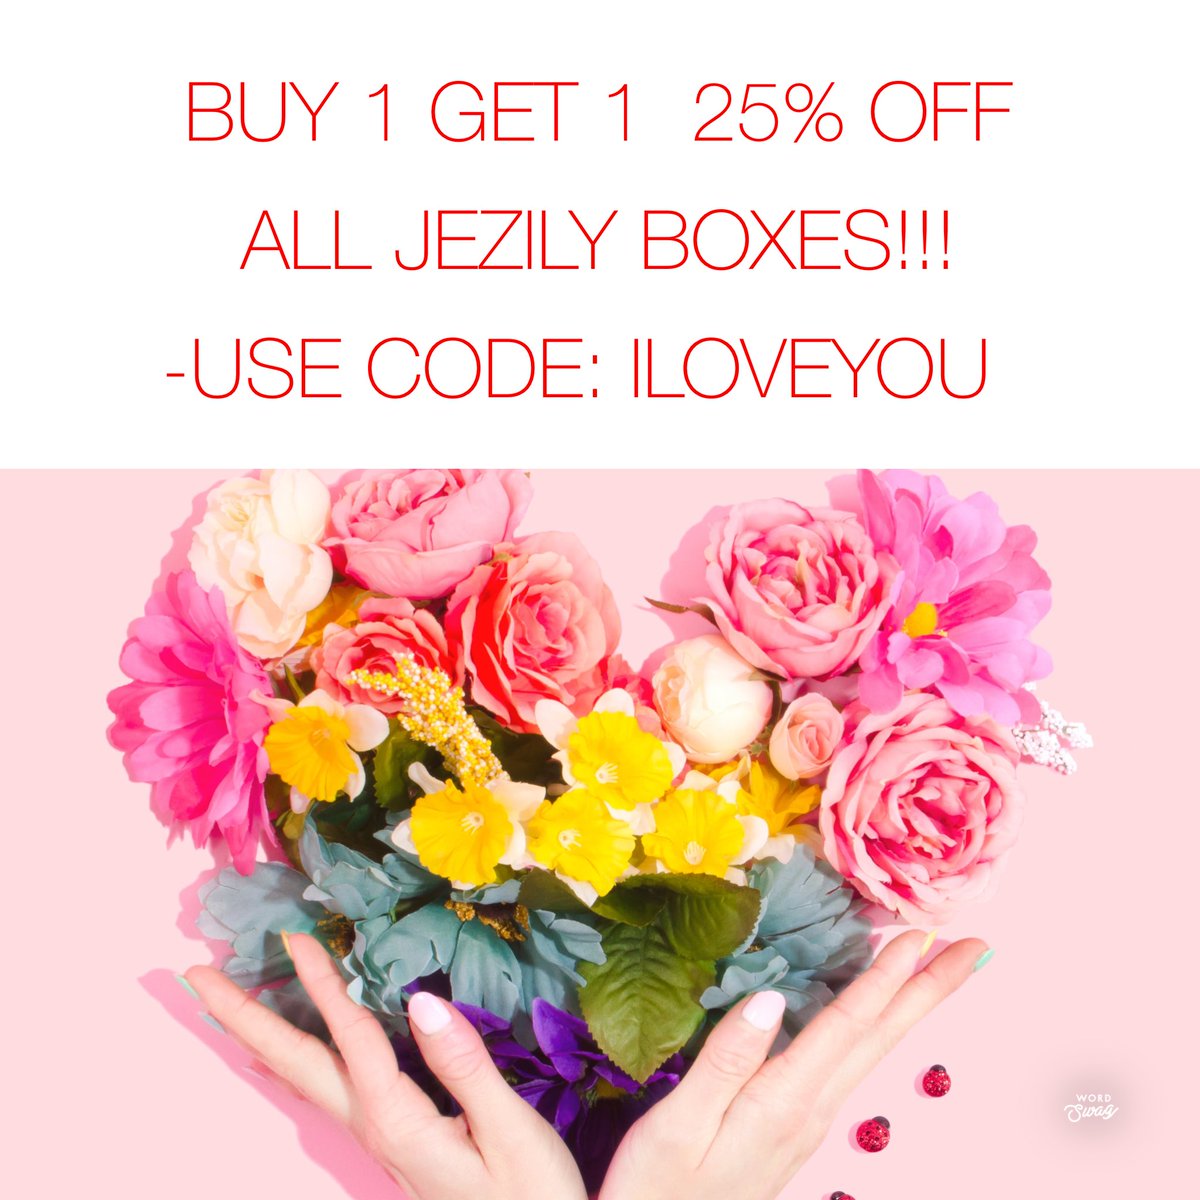 BOGO SALE on Jezily.com for a limited time!
Go get your #babygift #today #shopnow #moms #dads #subscriptionbox #firsttimemom #firsttimedad #pregnant #expecting #busymom #busydad #workingmom #workingdad #babyshower #babyshowergift #shoplocal #babyproducts
#BlackOwned